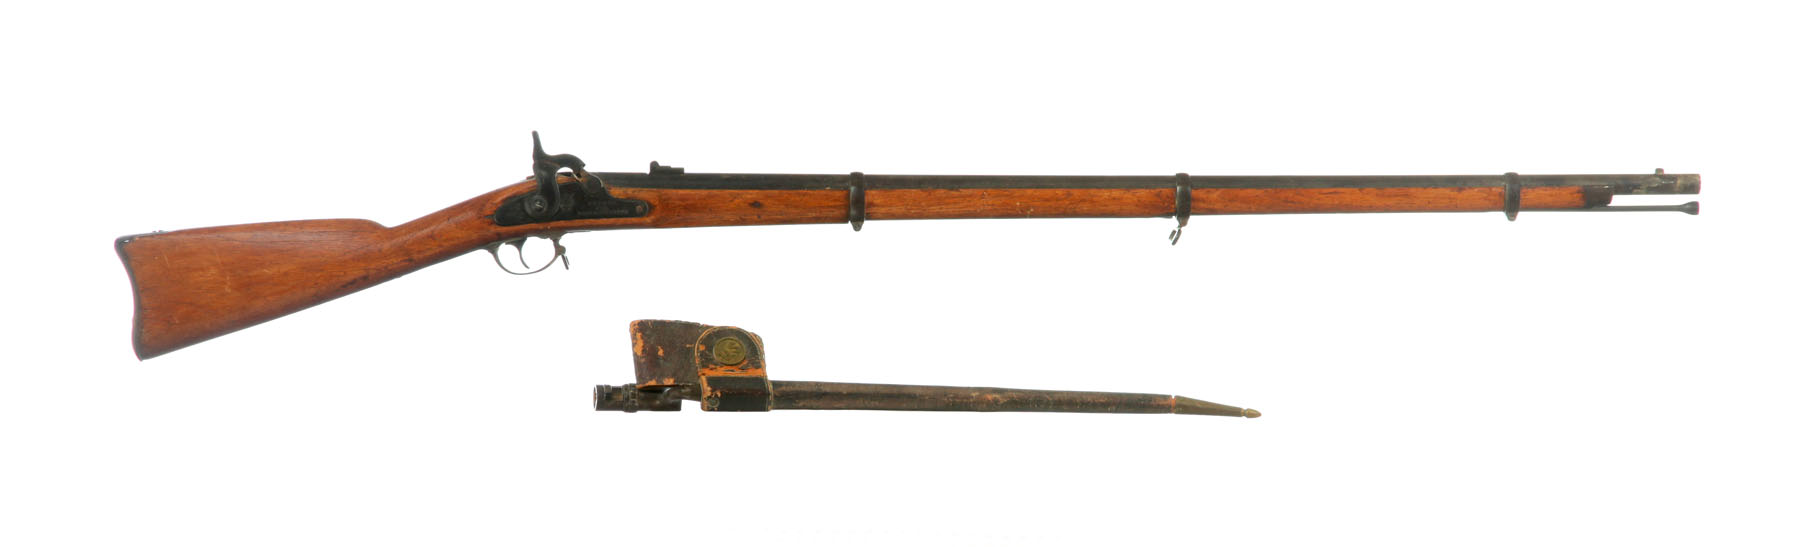 CLEMENT AND NORRIS MODEL 1861 RIFLE-MUSKET.